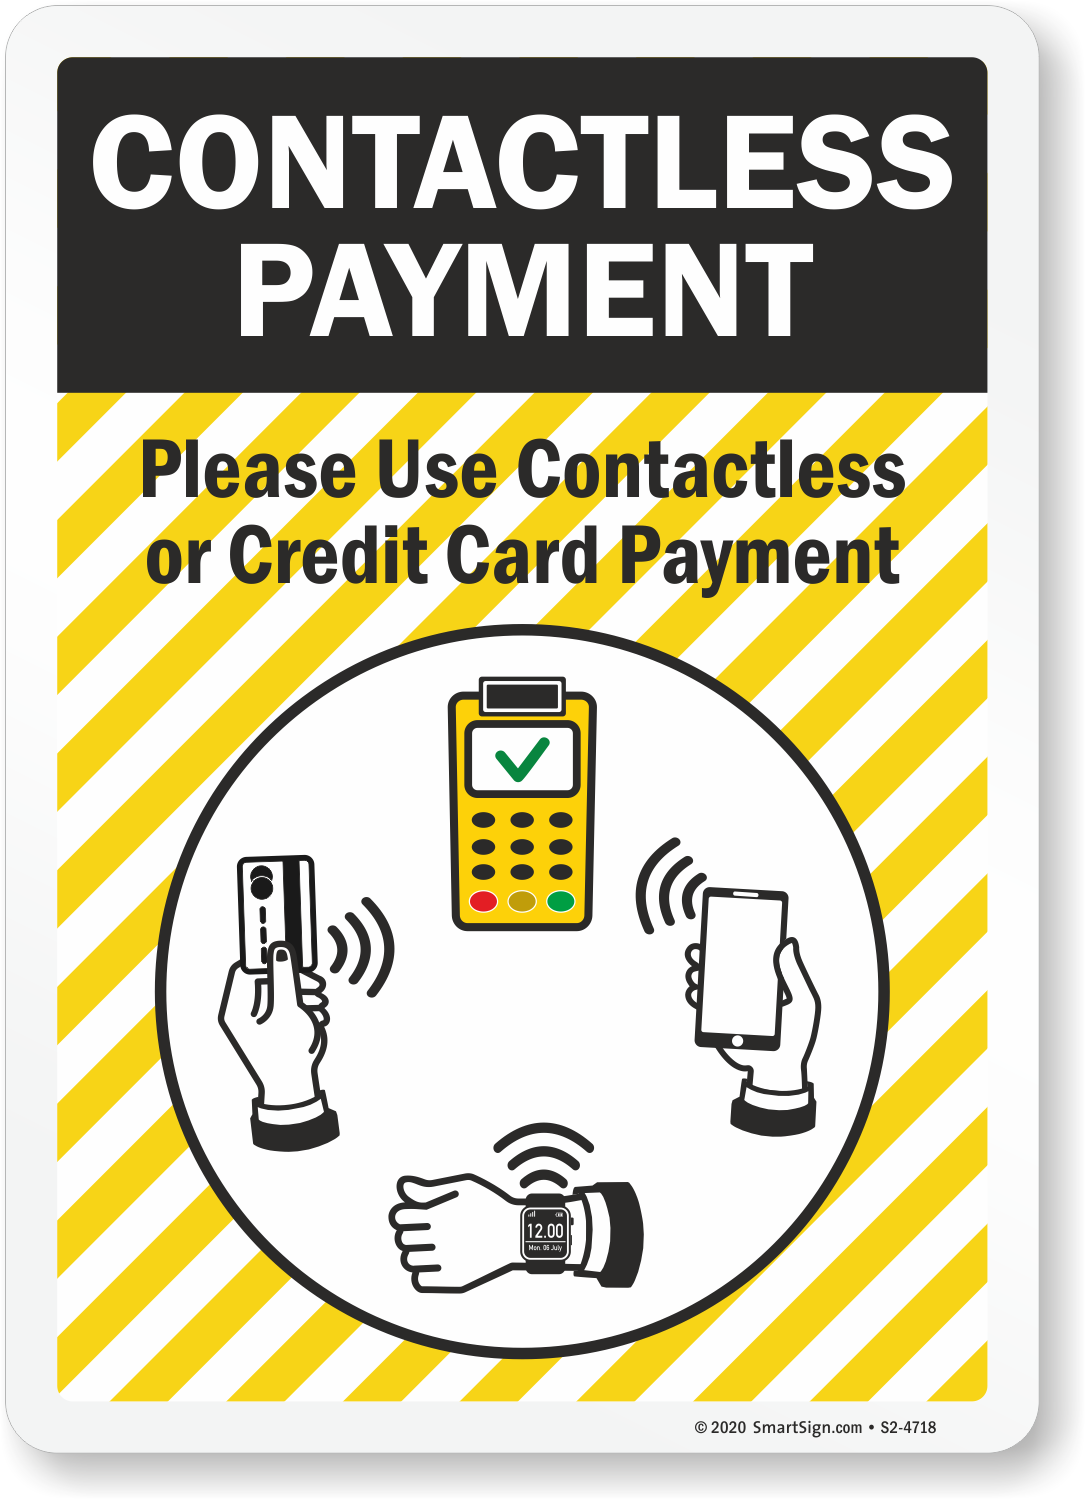 Free Shipping Contactless Payments & Credit Cards Accepted Signs 5 Pack 